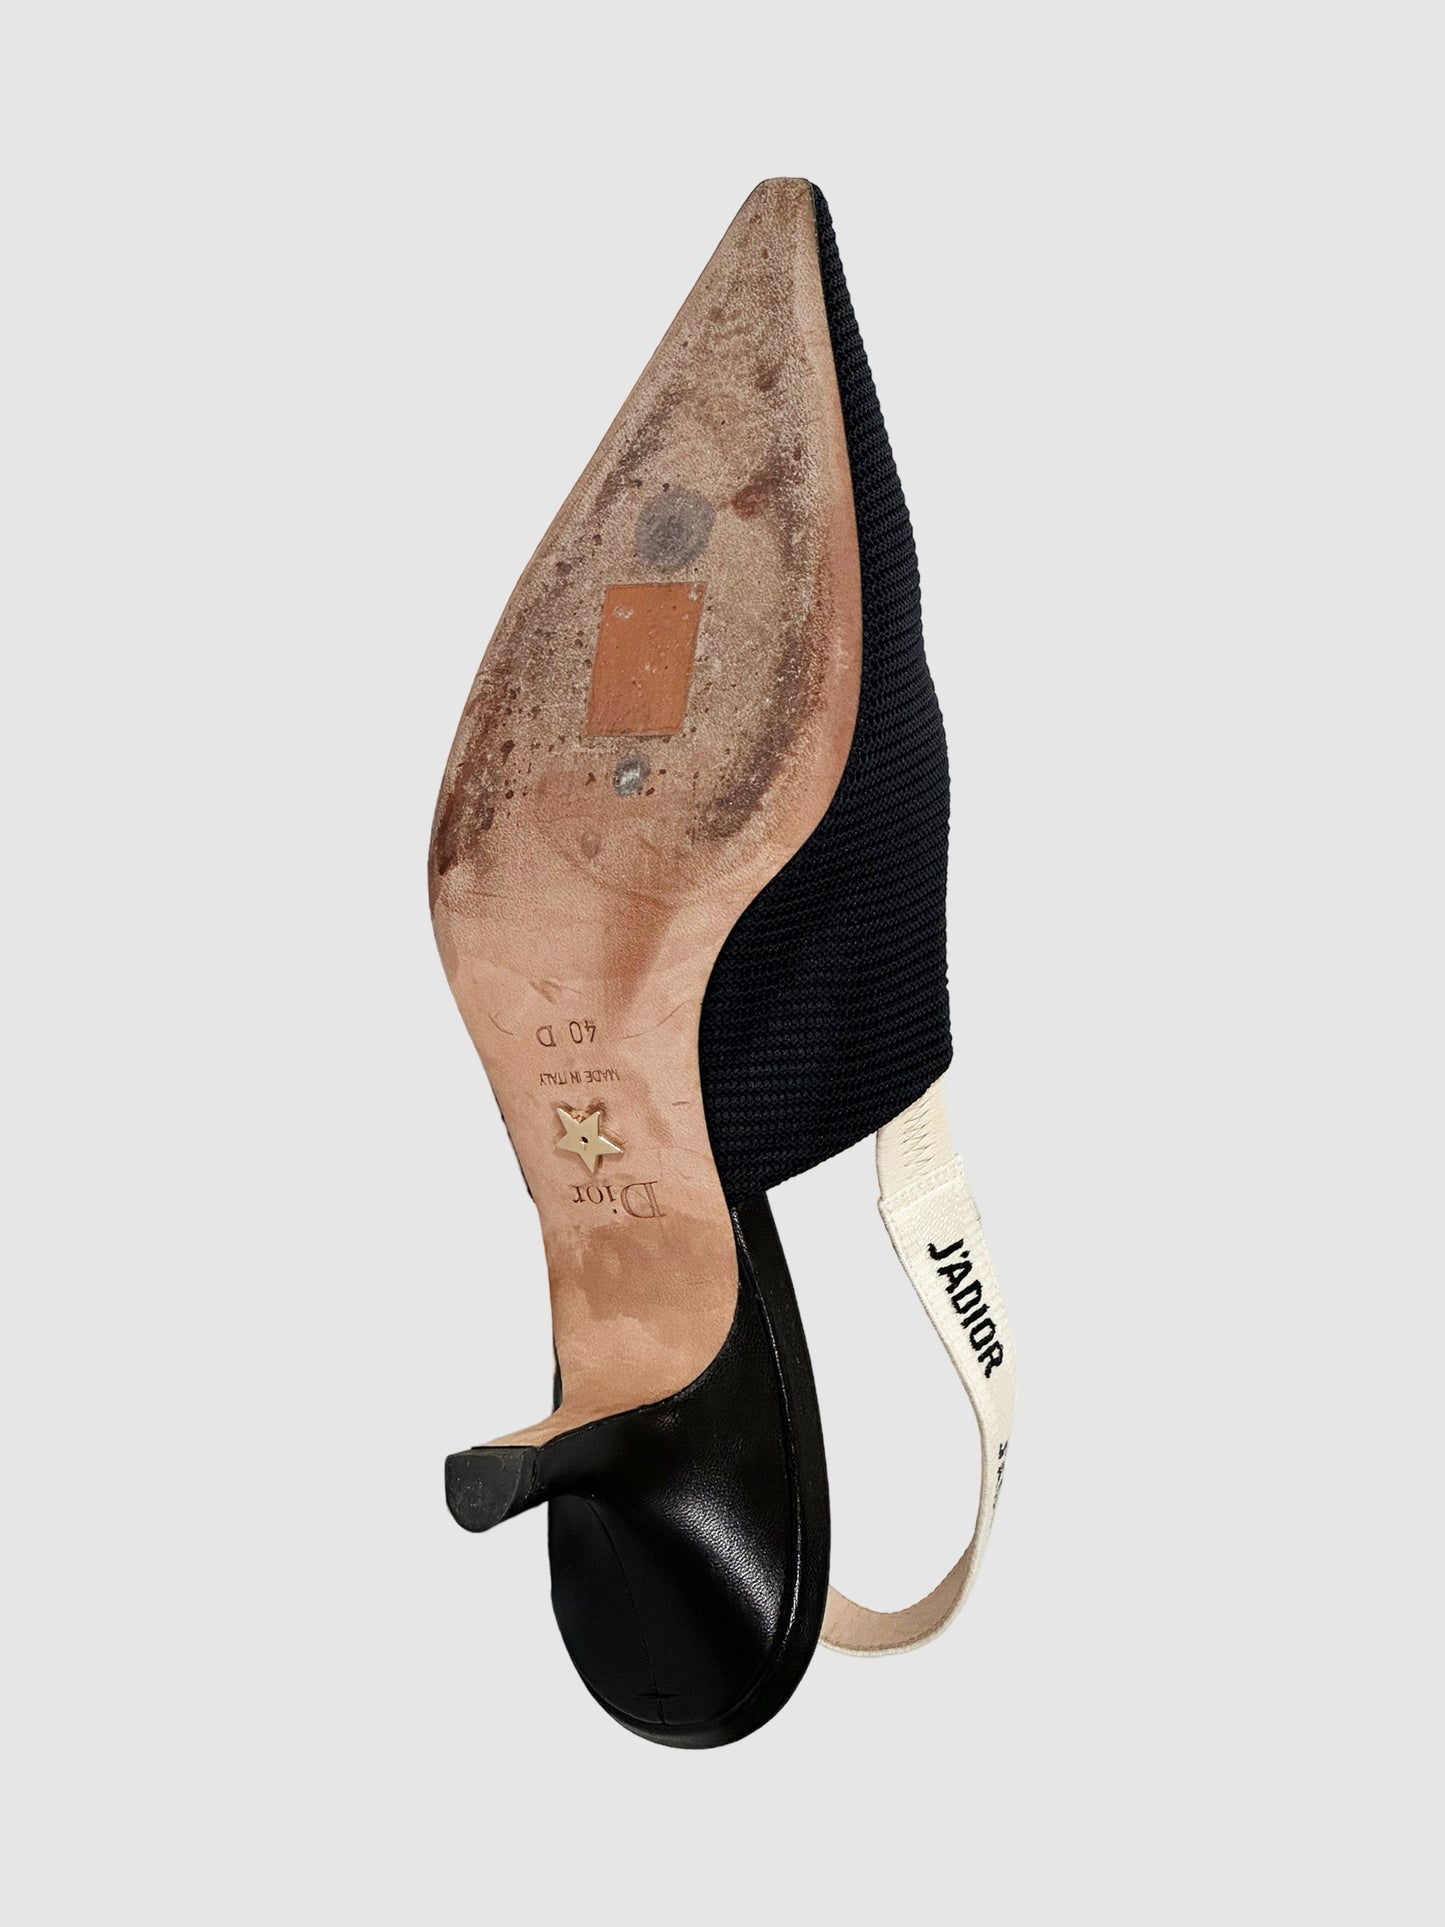 Christian Dior Canvas Printed Slingback Pumps - Size 40